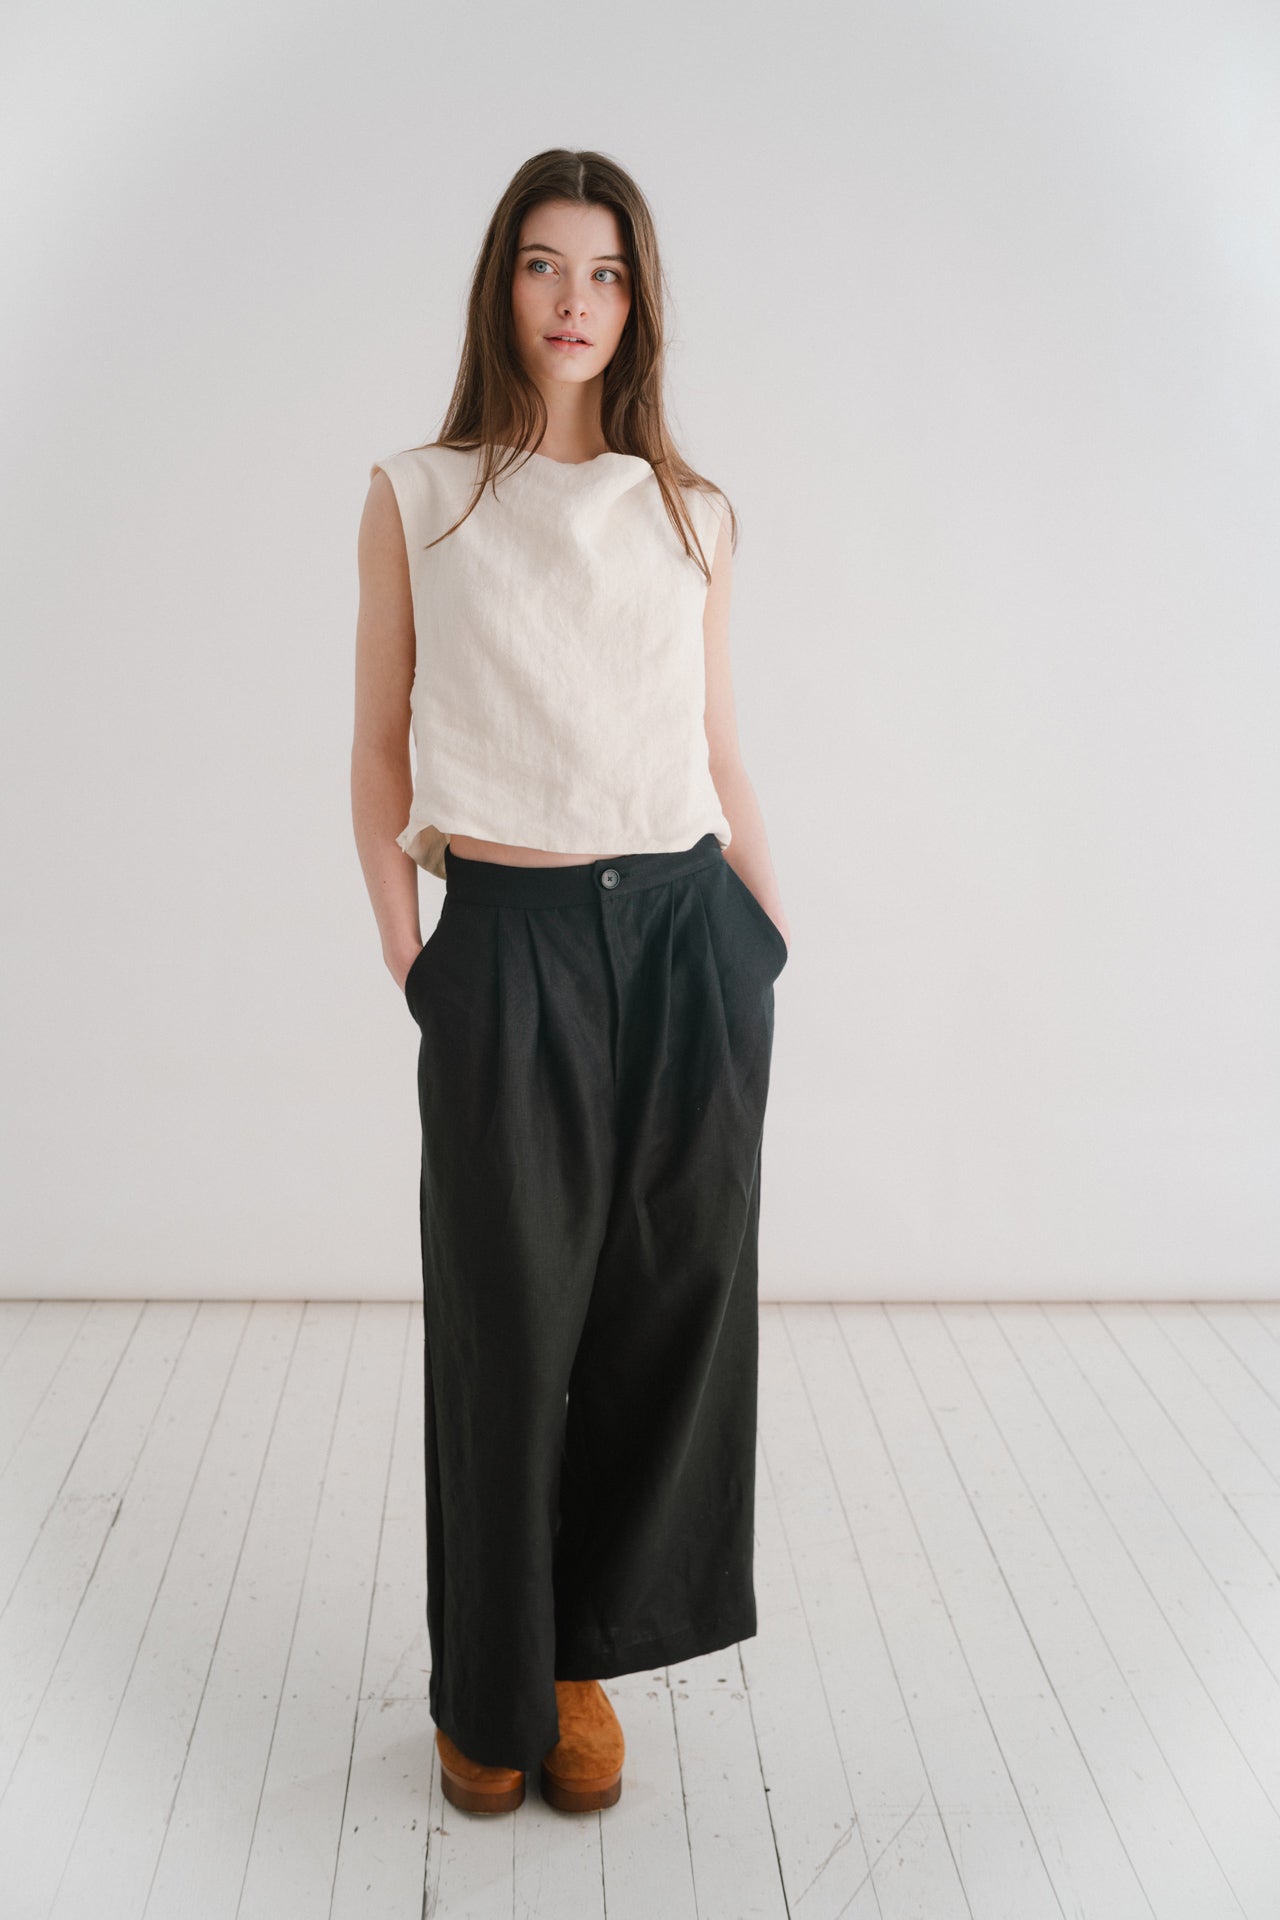 EVIE COWL TOP | A statement in her simplicity. Evie is an absolute staple for your SS wardrobe. Can be worn on or off the shoulder depending on your desired look. A slightly cropped length and side seam zip detail make her a flattering pairing with your f